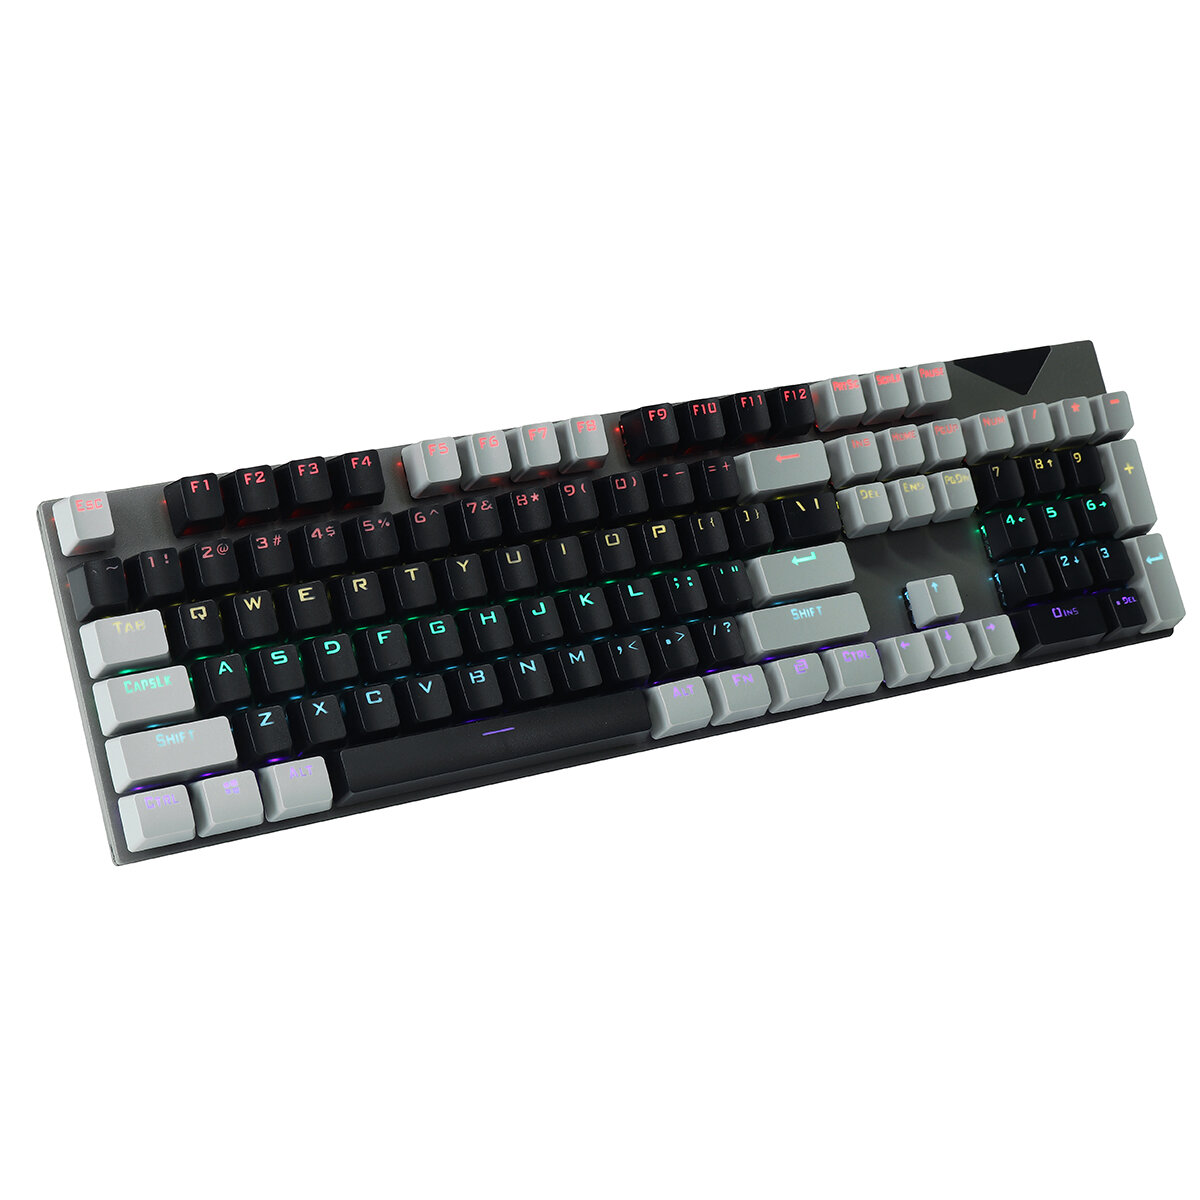 KB168 Wired Mechanical Keyboard 104-Key Conflict-Free Keys Suspend ABS Keycaps Blue Switch RGB Backlit Mechanical Gaming Keyboard